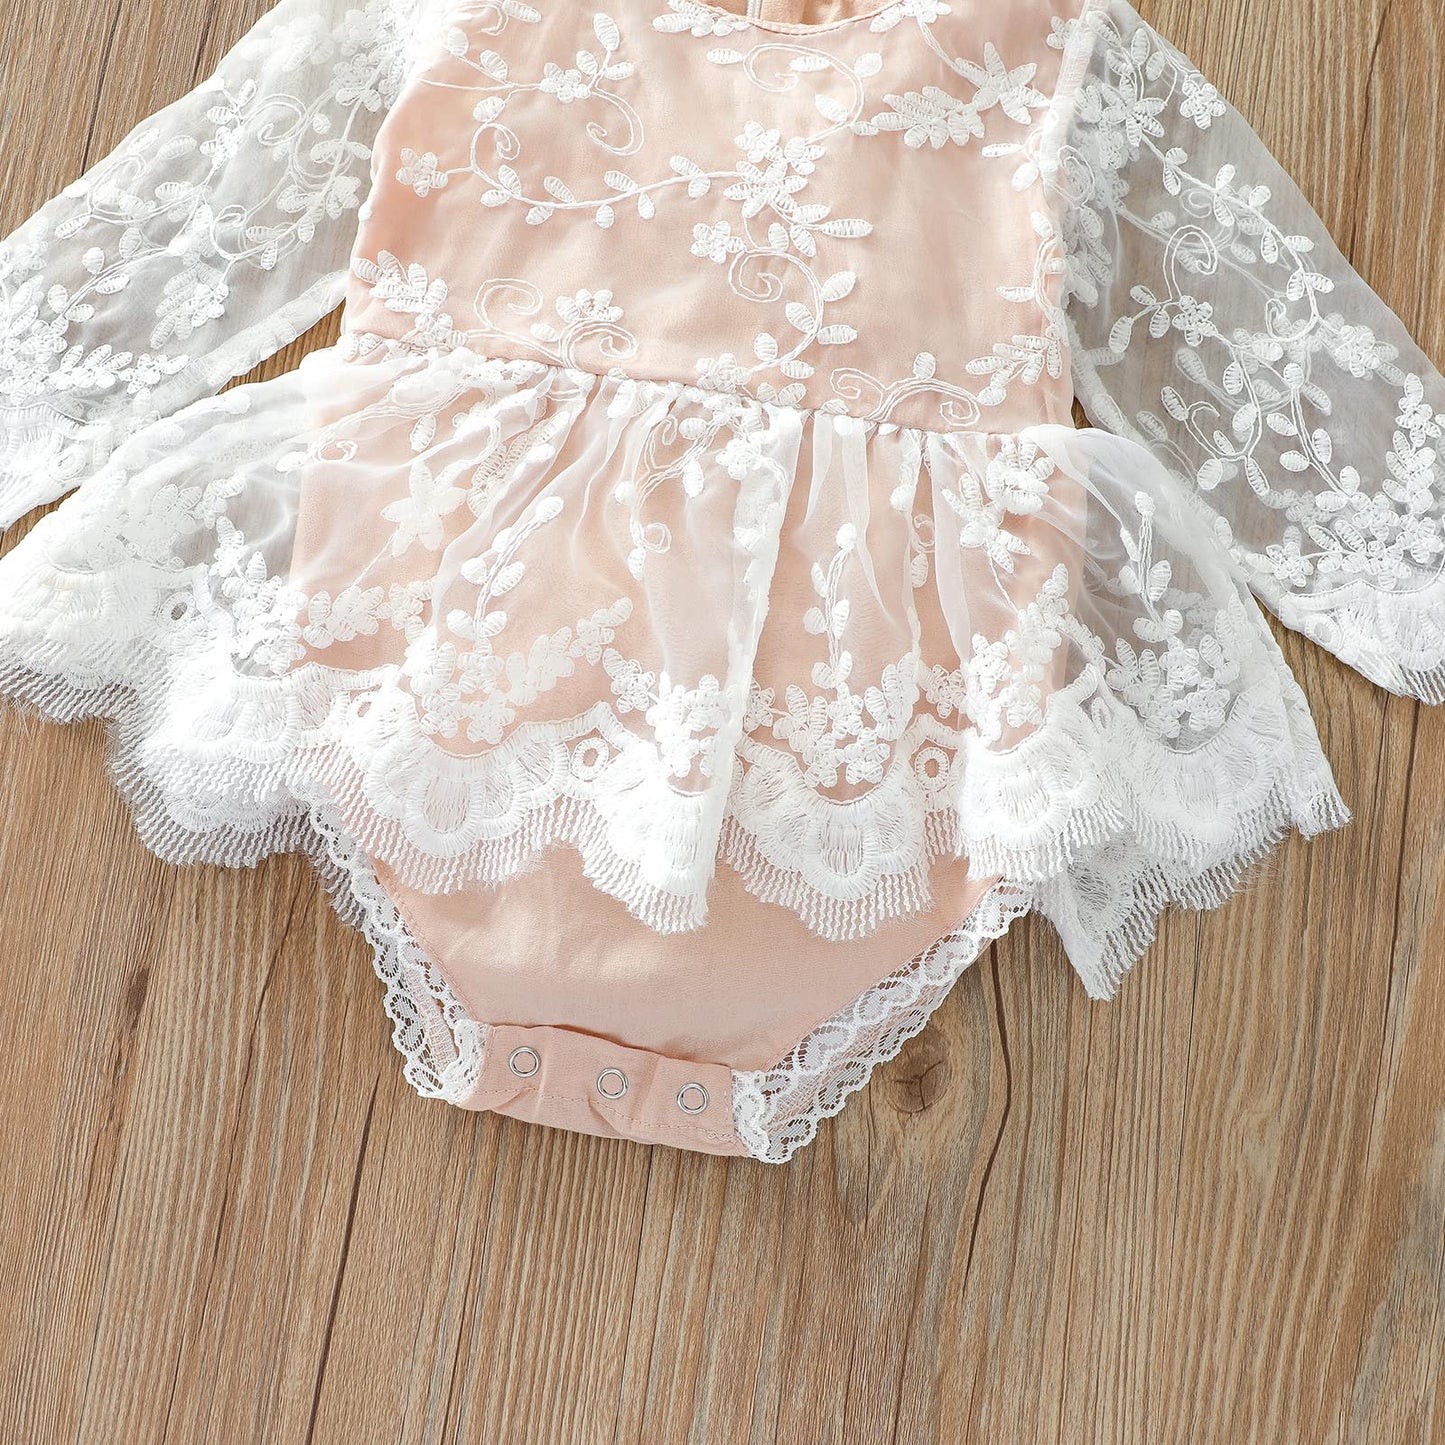 IBTOM CASTLE Baby Girl Summer Clothes Boho Lace Romper Dress Ruffle Embroidered Bodysuits Backless One Piece Jumpsuit Infant Coming Home Onesie Ist Birthday Cake Smash Photoshoot Outfit 3-6 Months